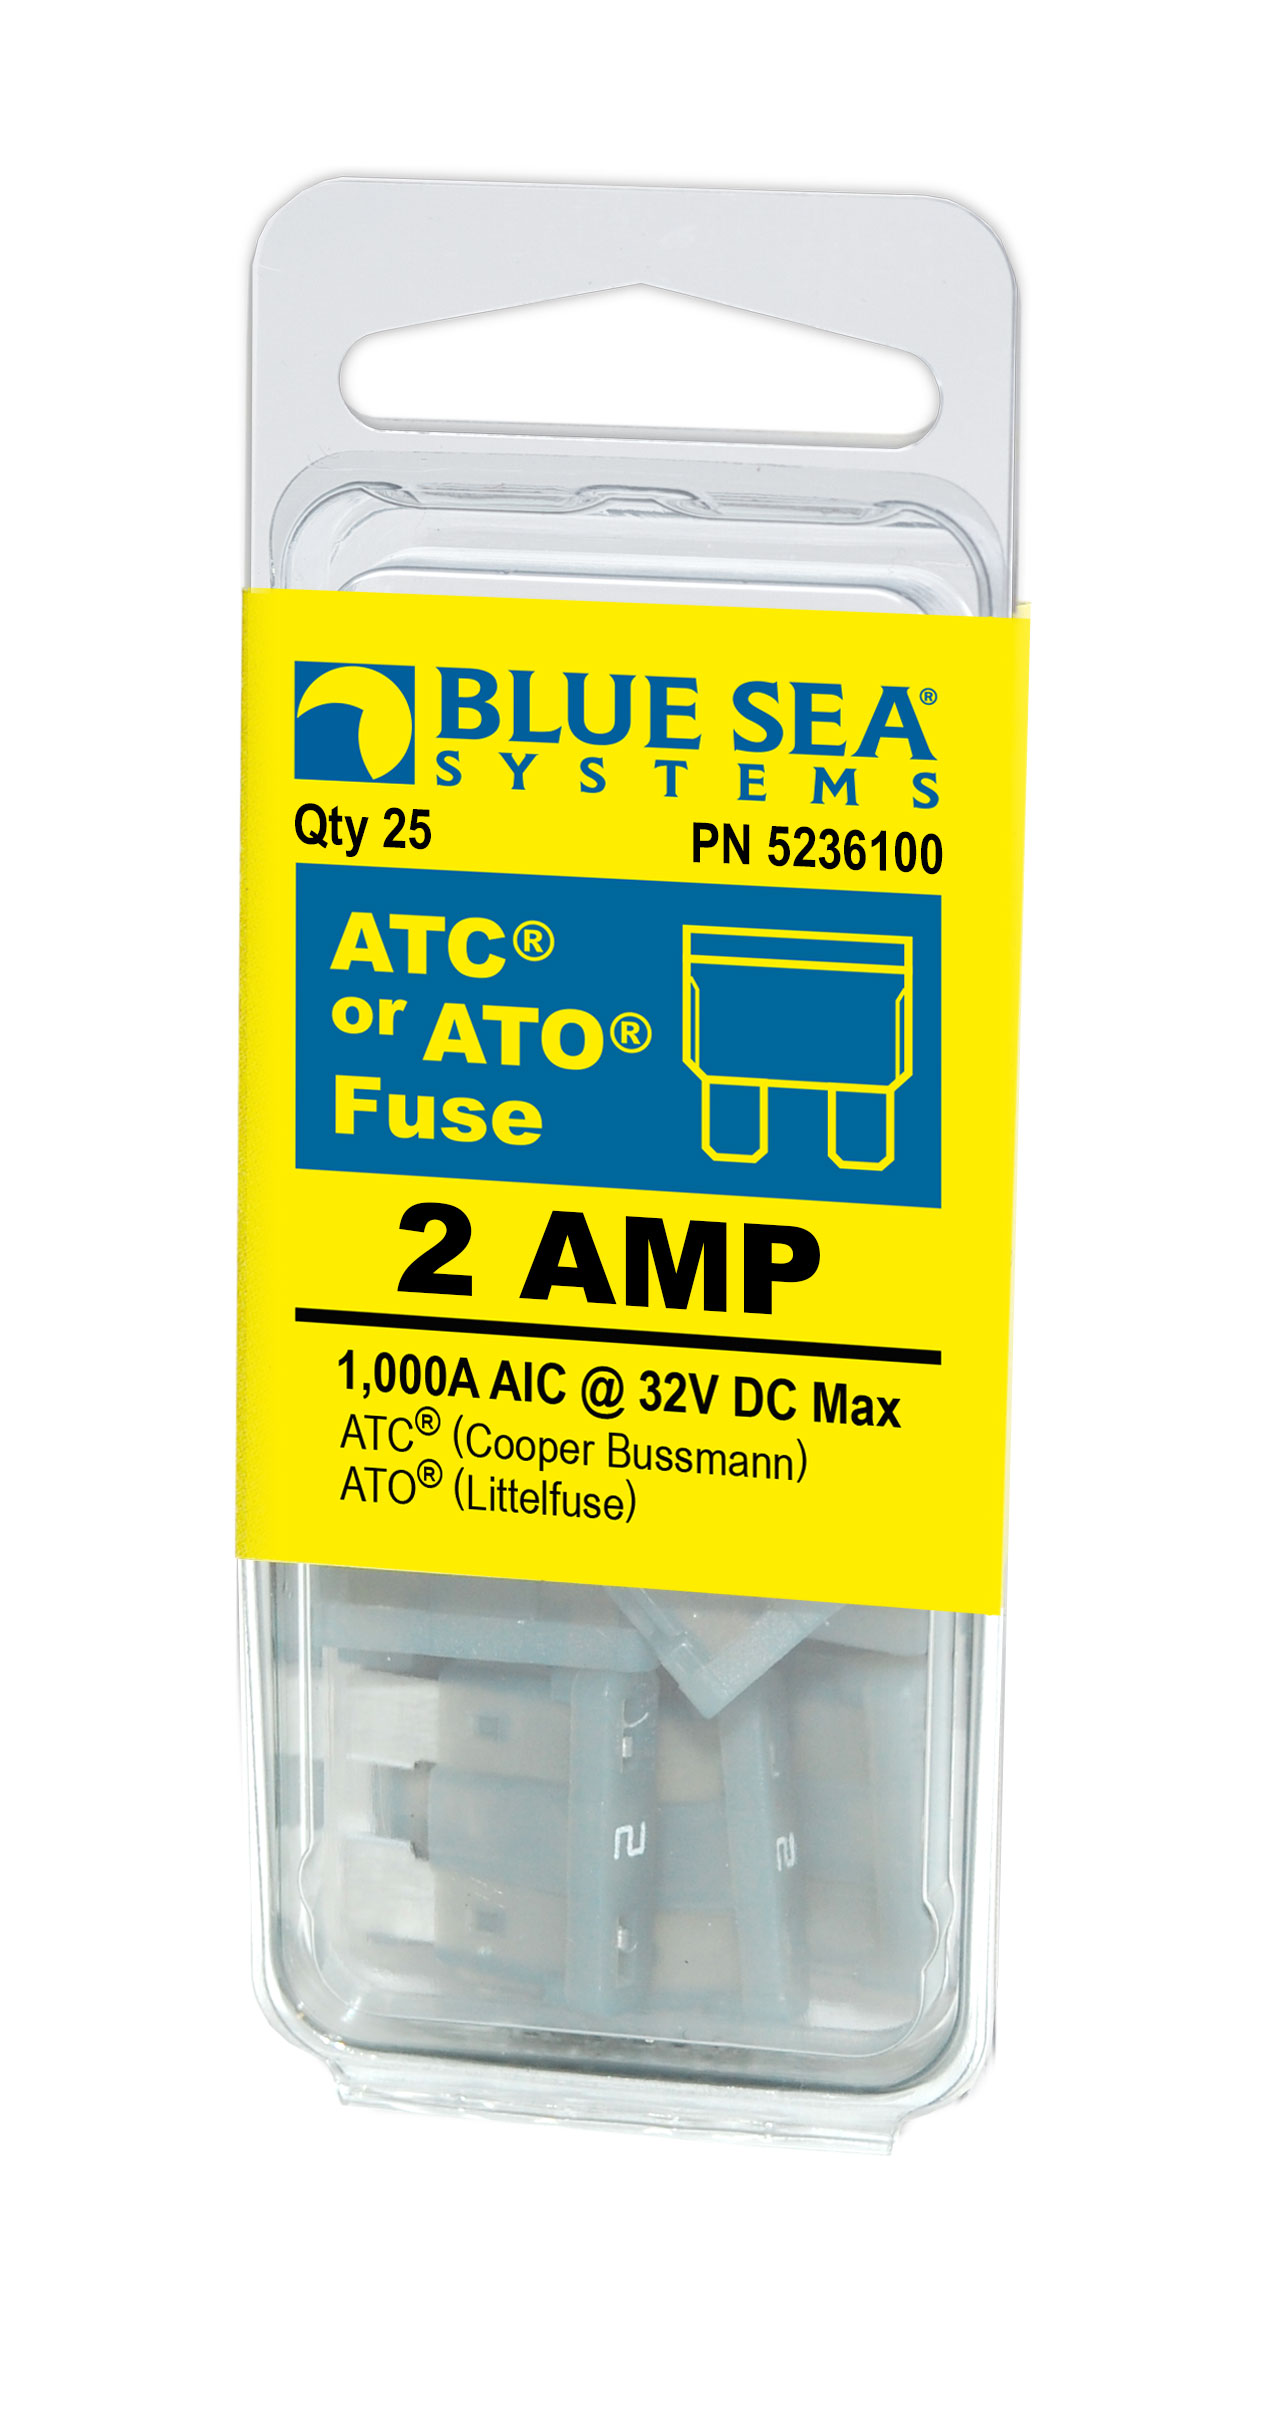 Part # 5236100  Manufacturer Blue Sea Systems  Product Type Fuse